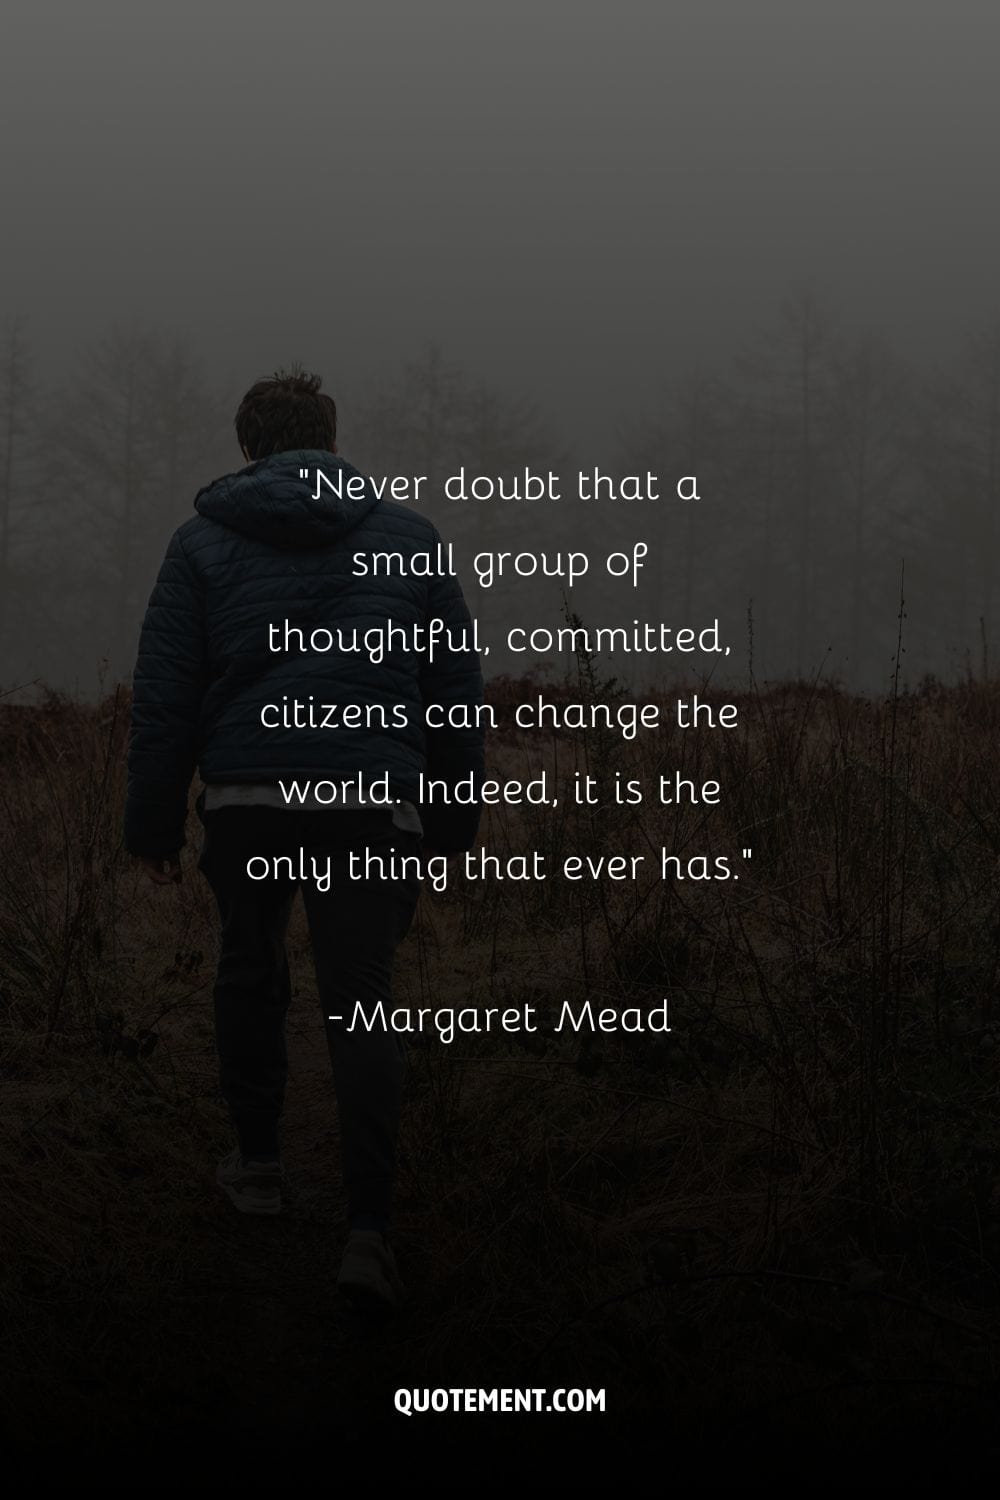 Never doubt that a small group of thoughtful, committed, citizens can change the world. Indeed, it is the only thing that ever has